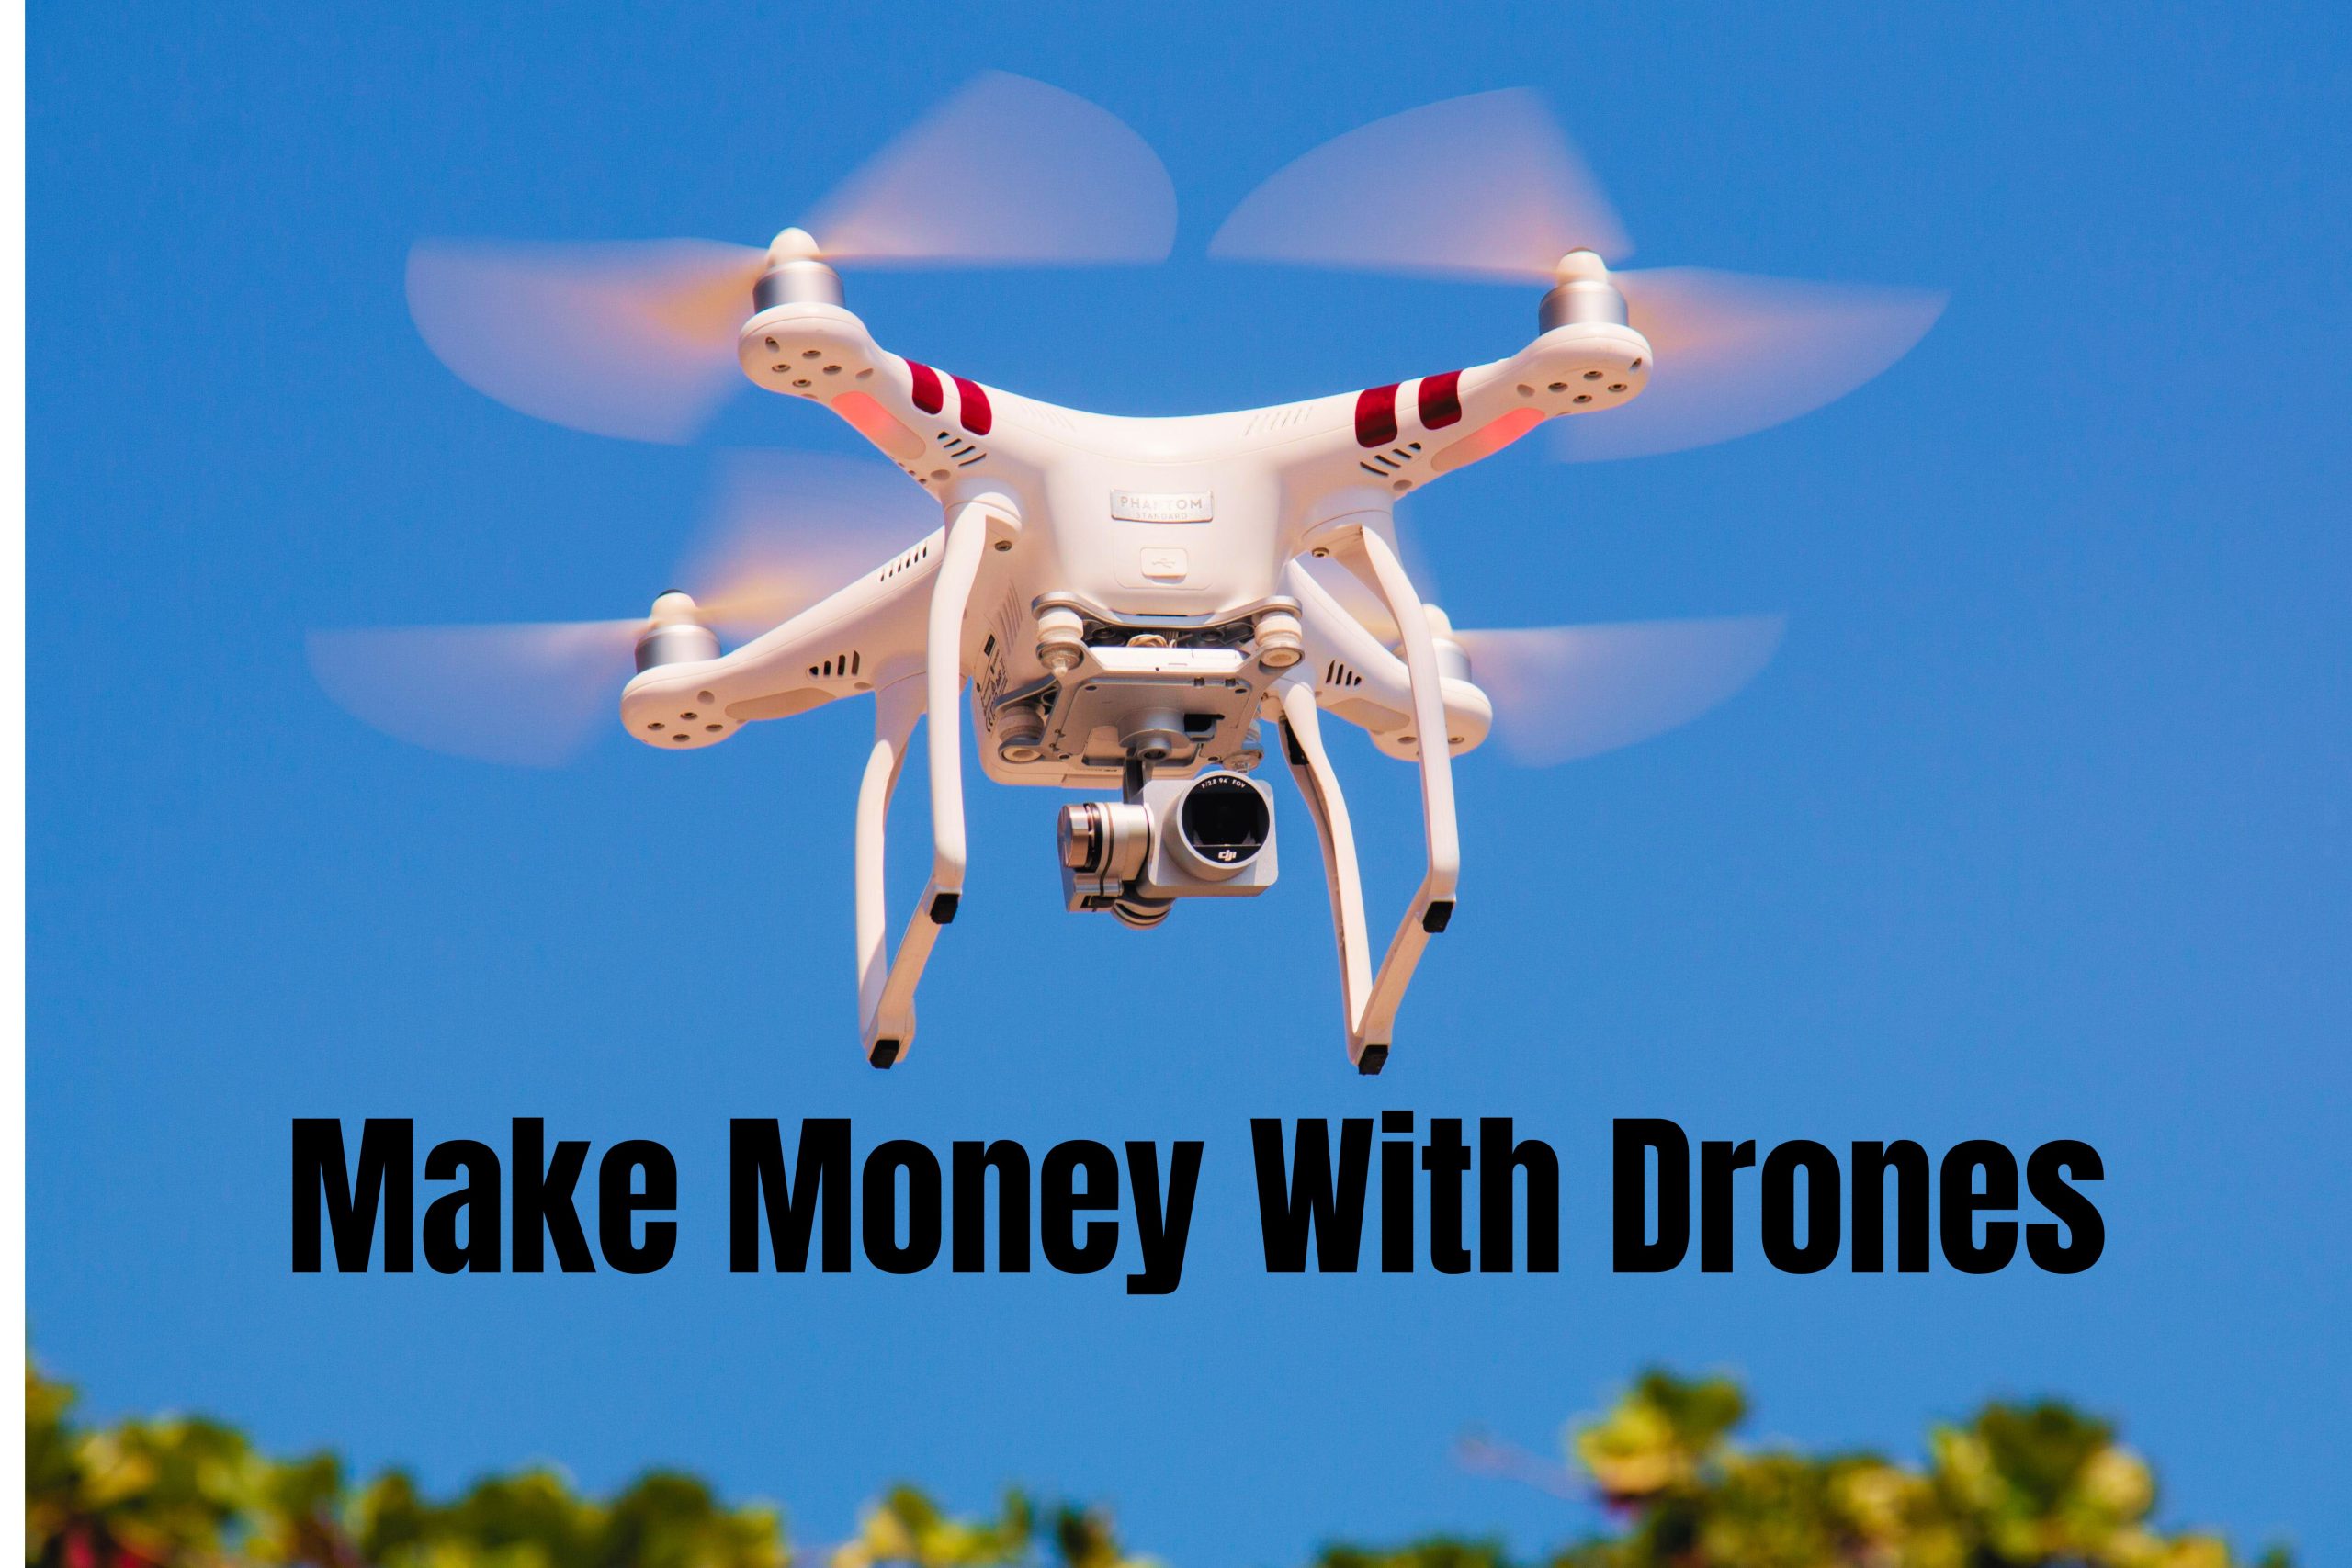 Make money with drones